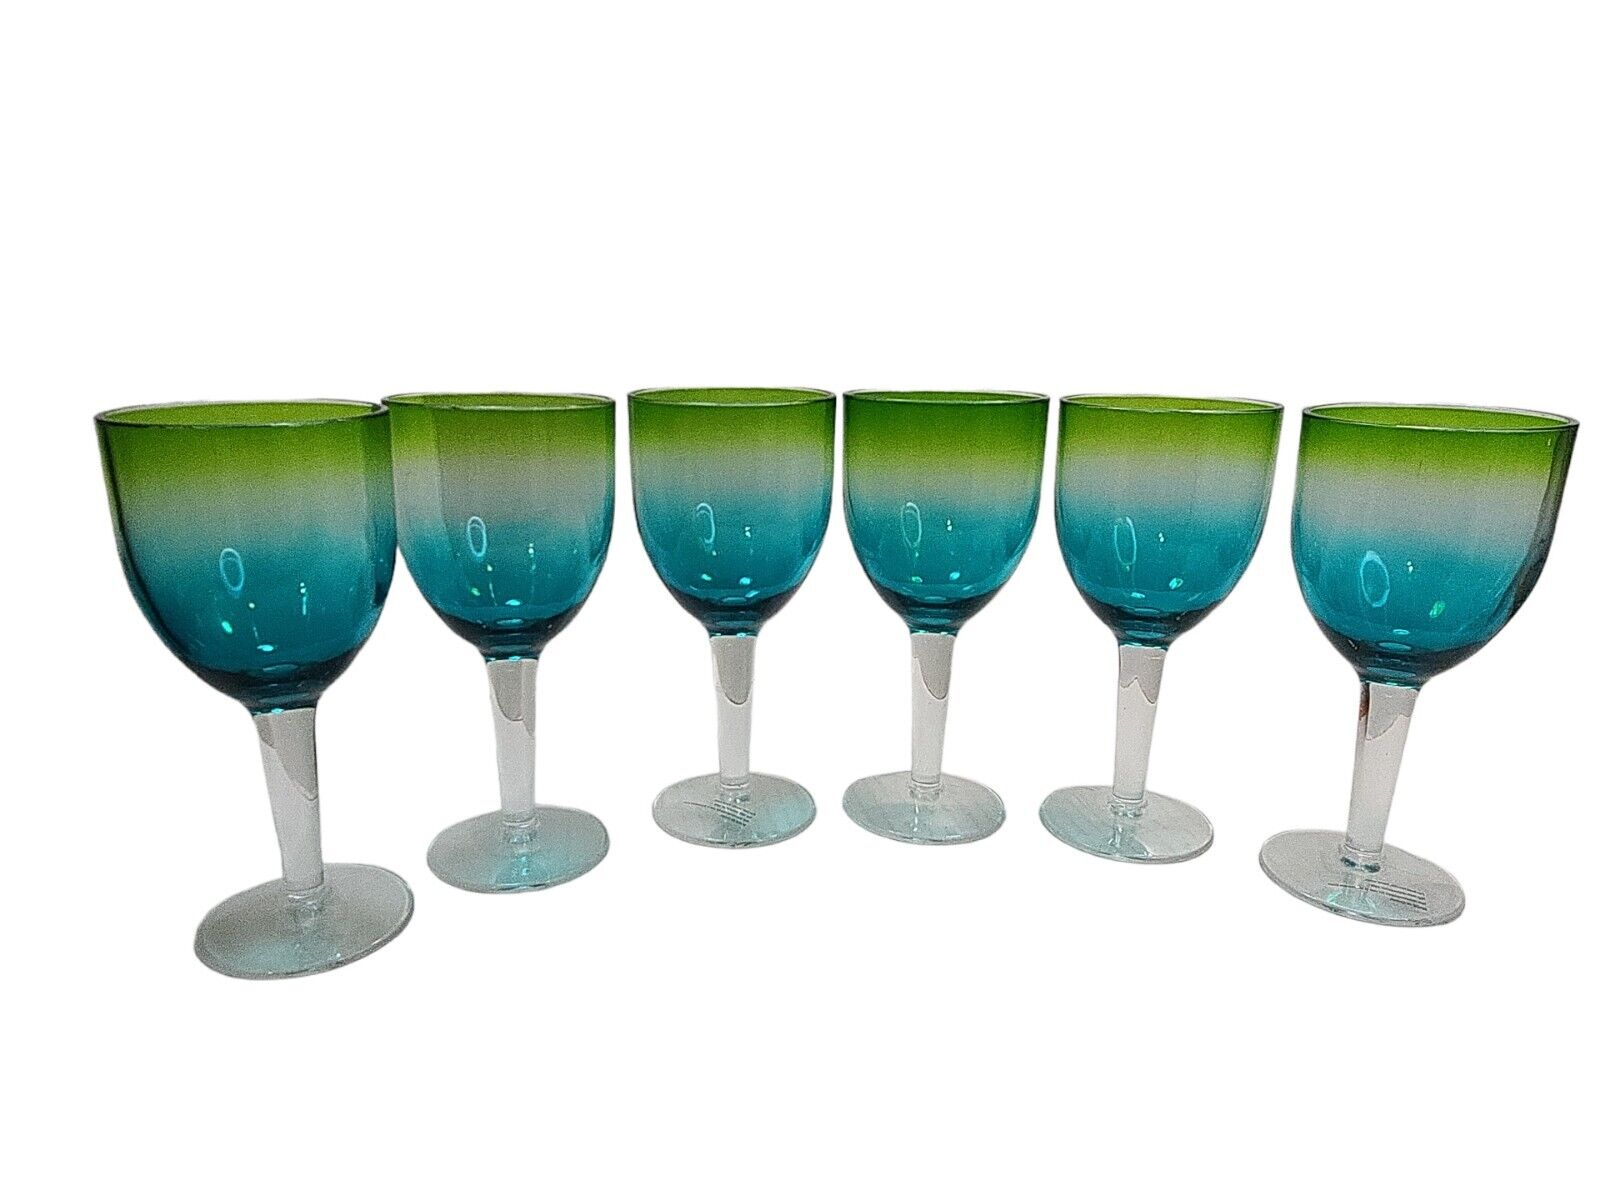 6 Acrylic Wine Or Frozen Drink Glasses Patio Outdoors Shatter Proof Green Blue 